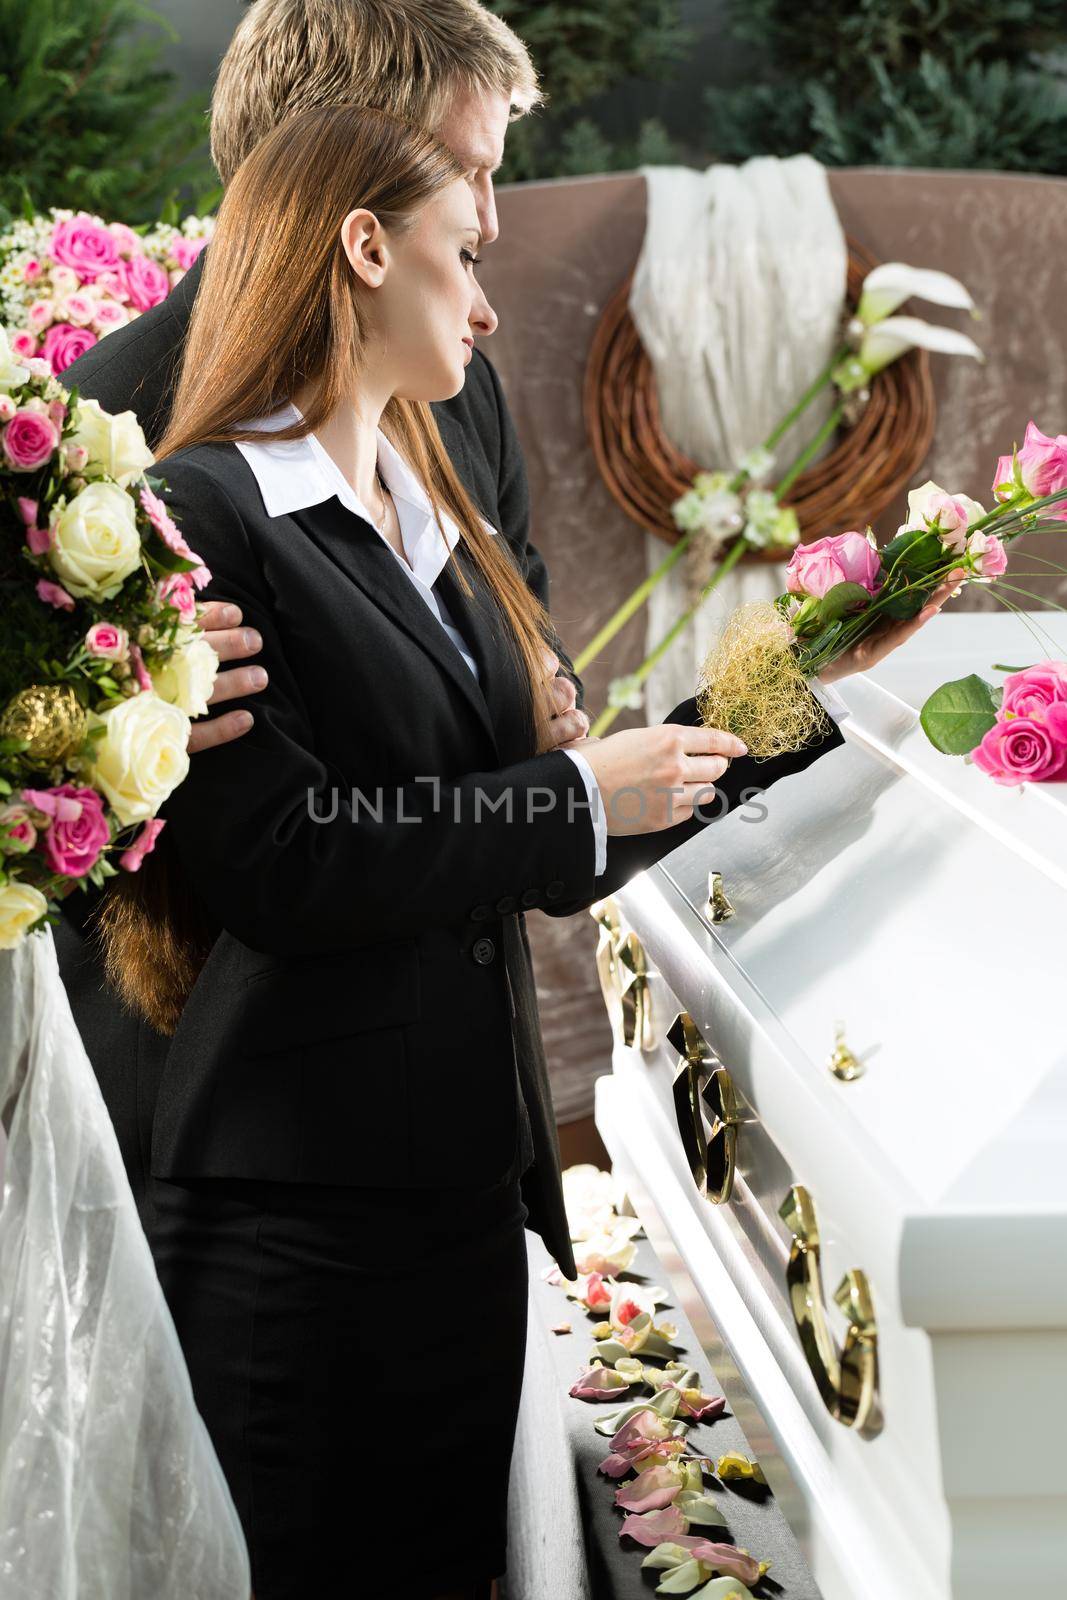 Mourning People at Funeral with coffin by Kzenon